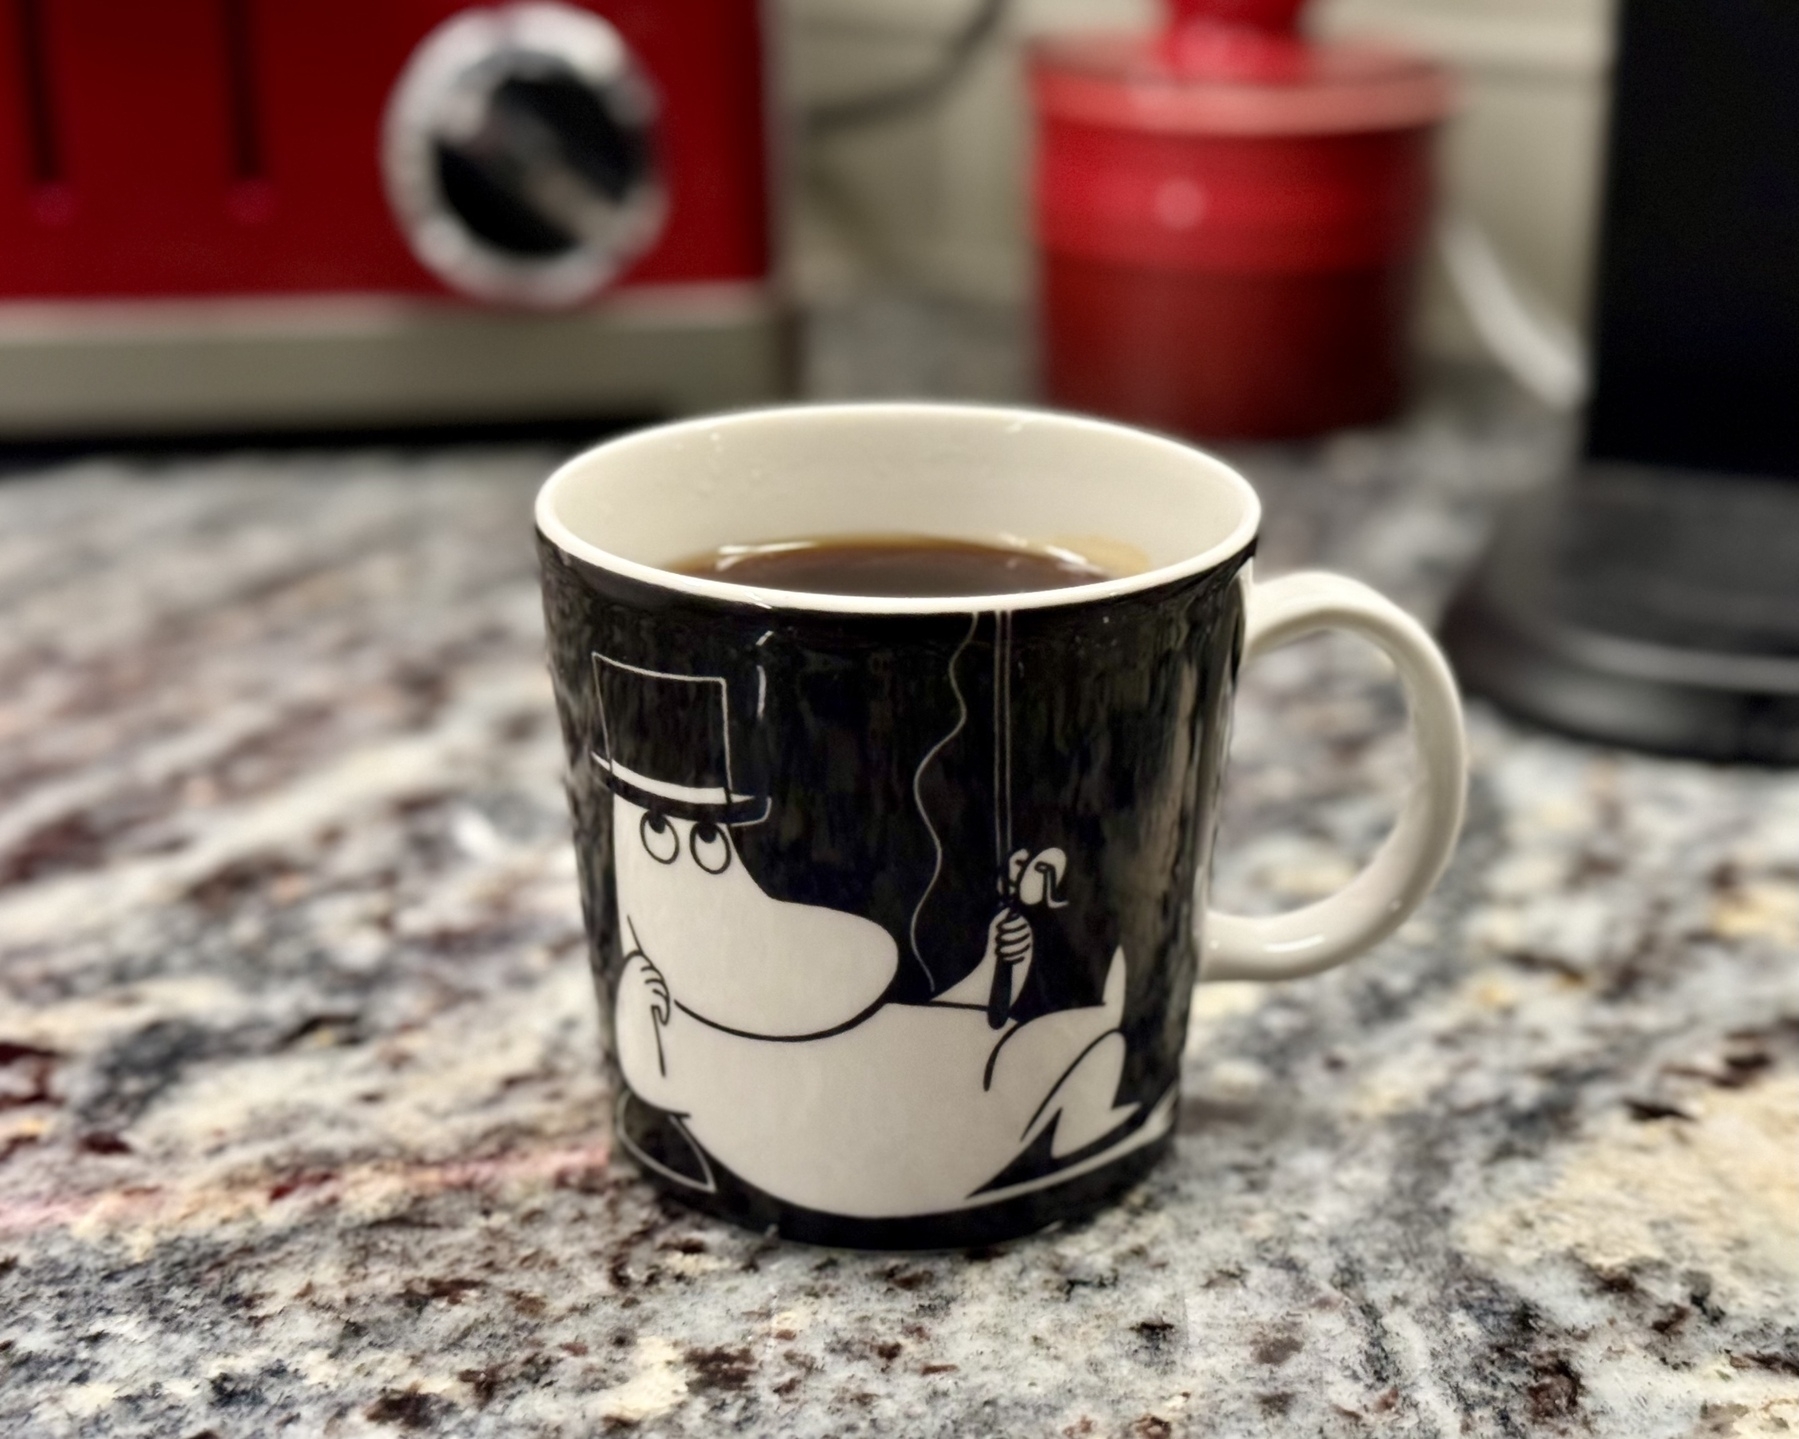 A cup of coffee on a kitchen countertop. Drawn on the mug is Moominpappa, a character from Finnish children’s books.